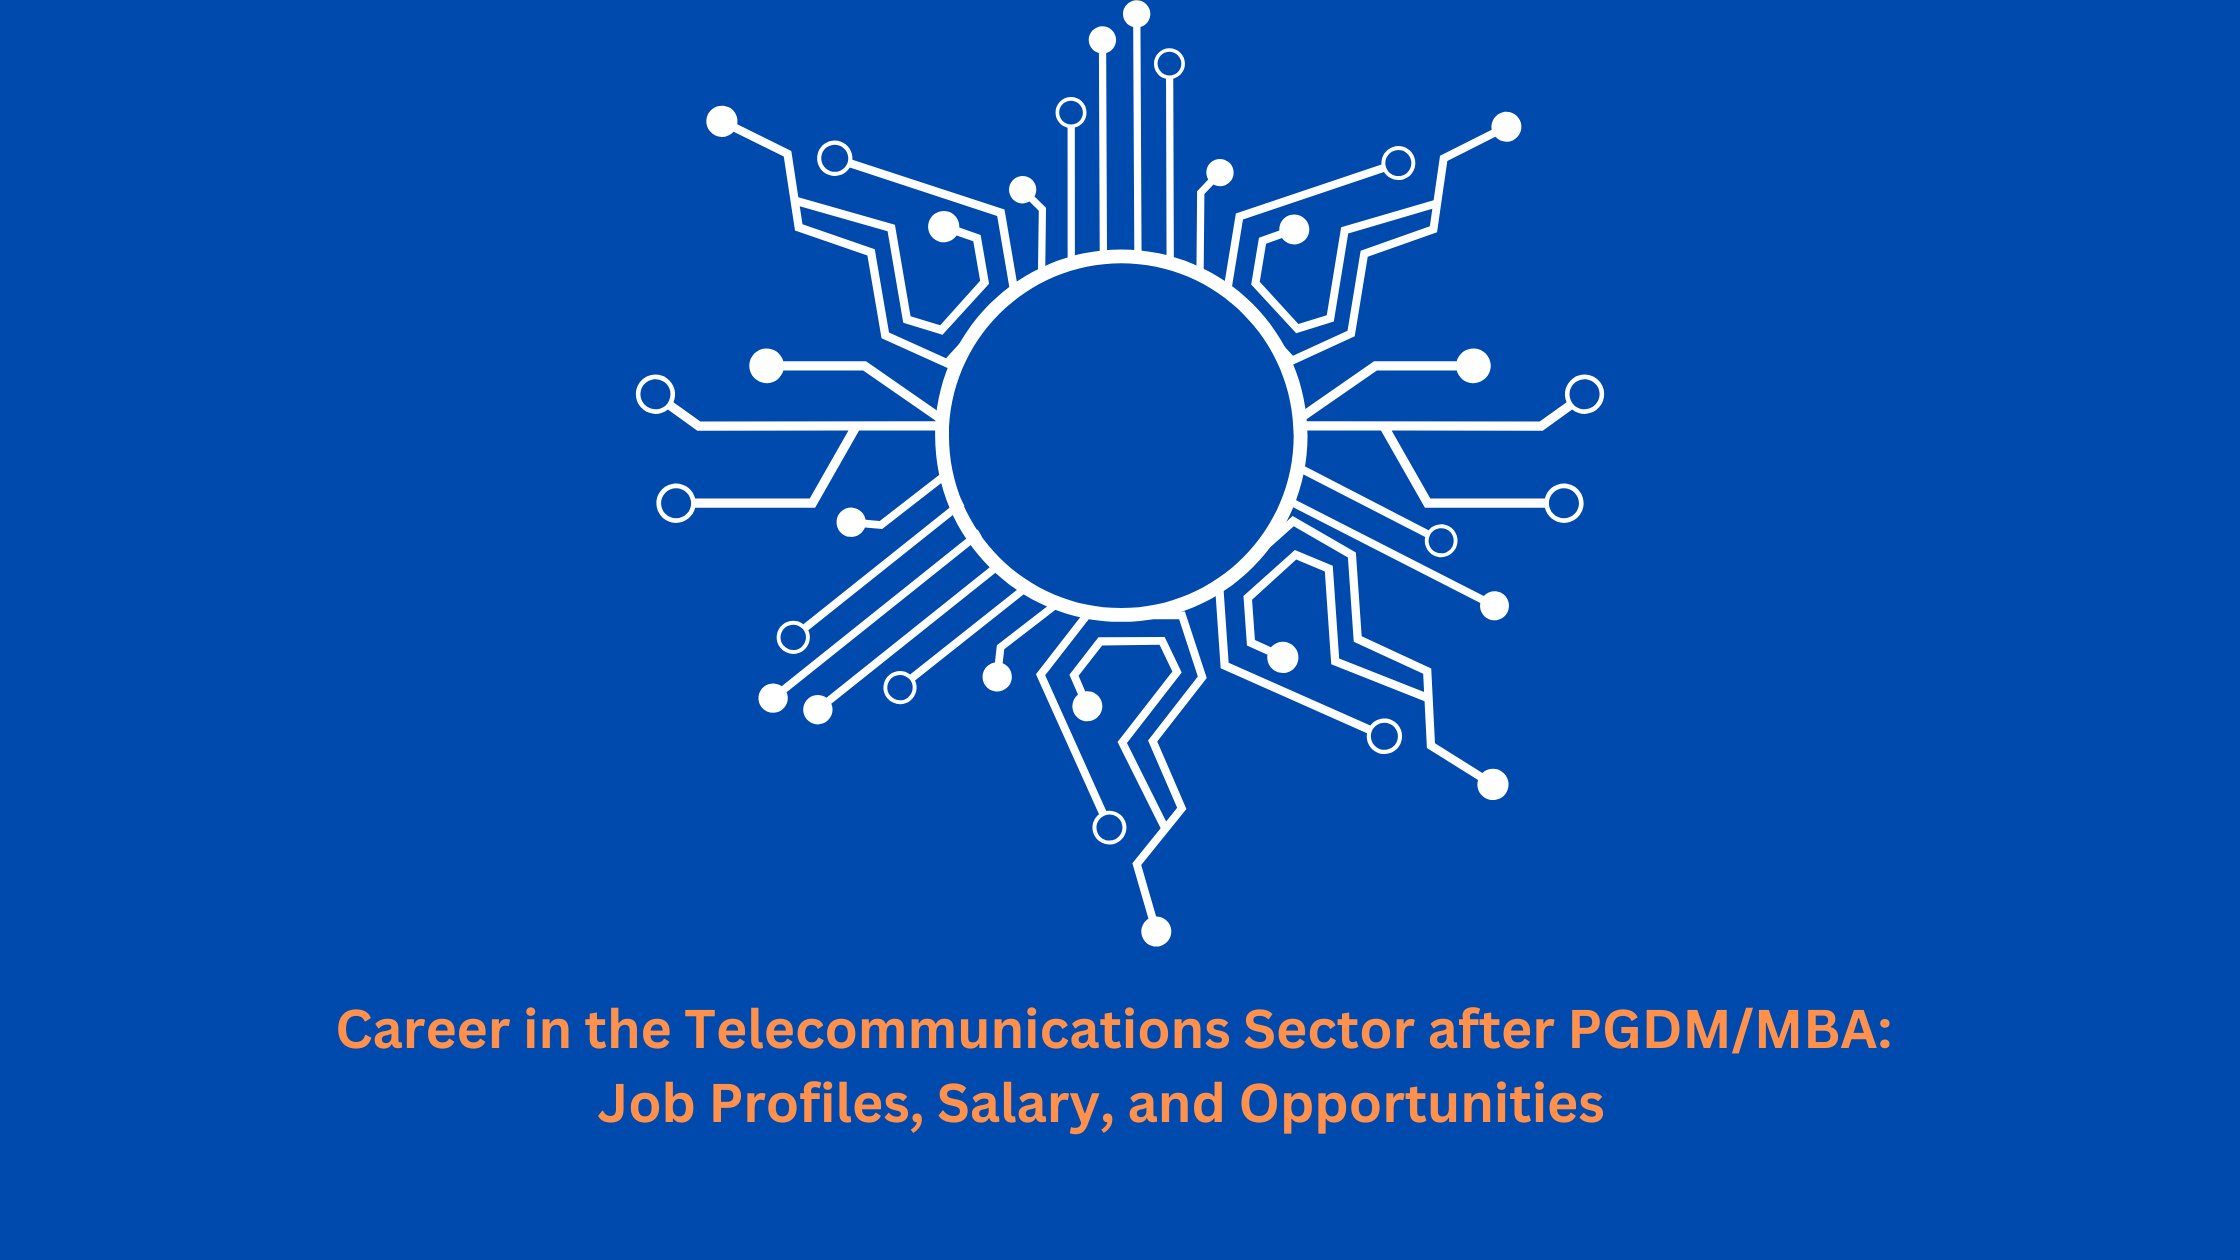 Career in the Telecommunications Sector after PGDM/MBA: Job Profiles, Salary, and Opportunities